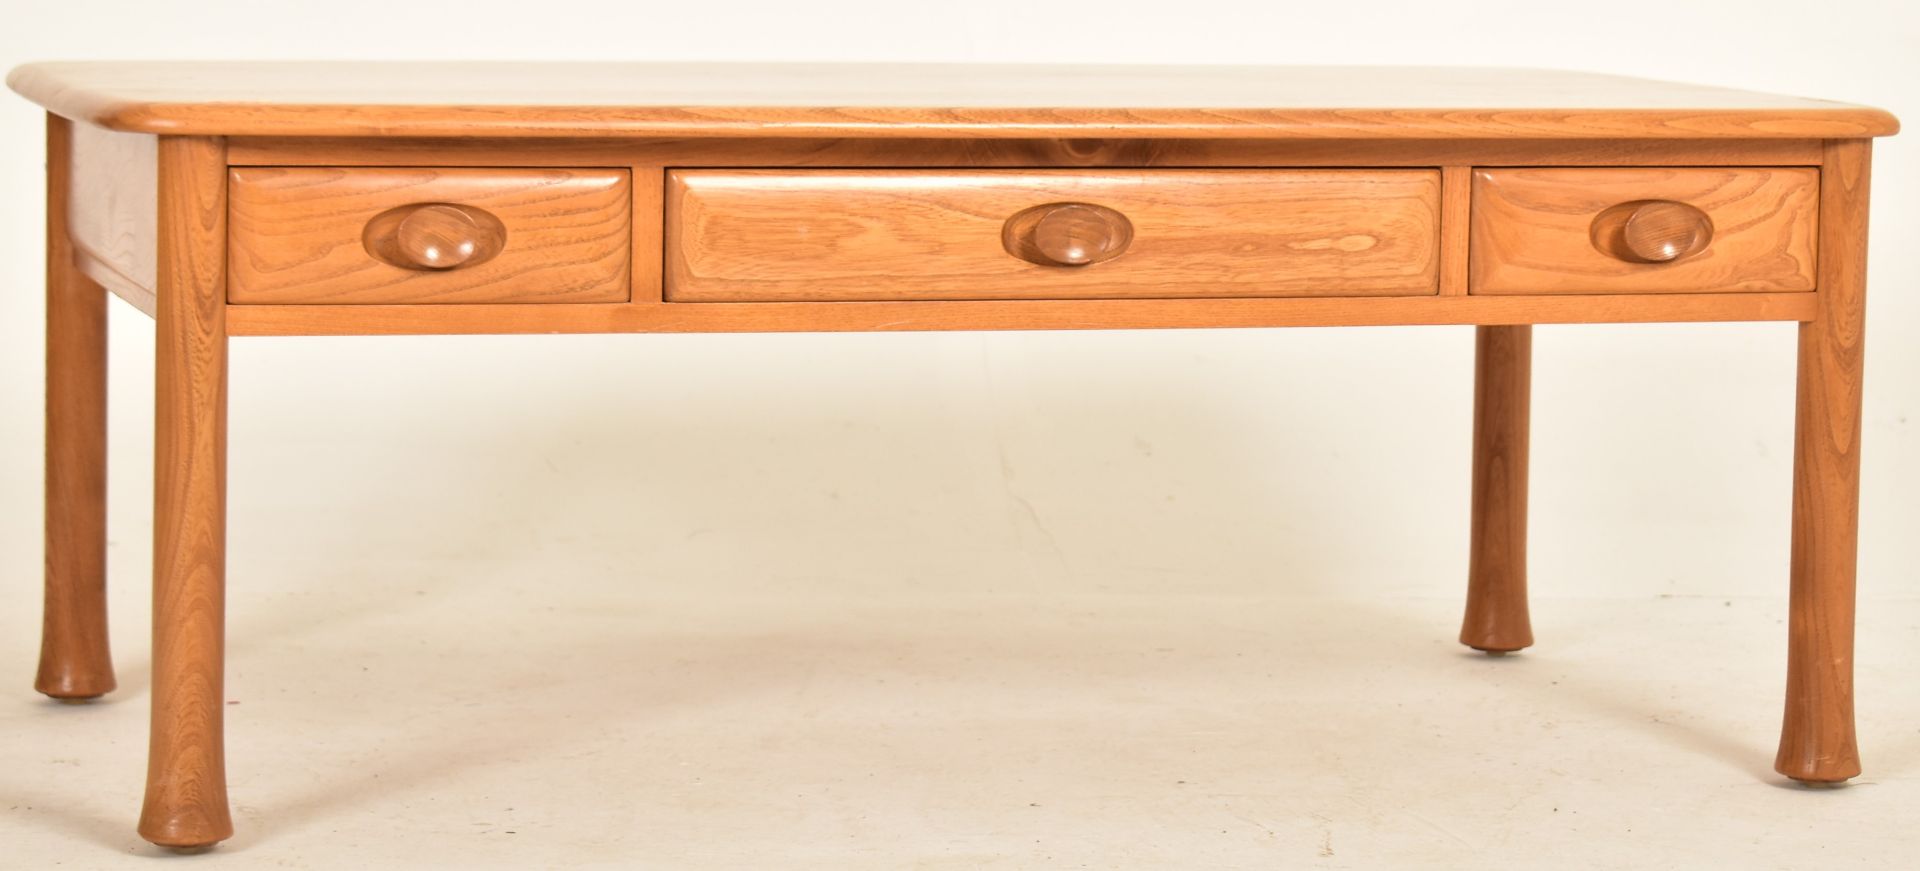 ERCOL - 20TH CENTURY BEECH AND ELM COFFEE TABLE